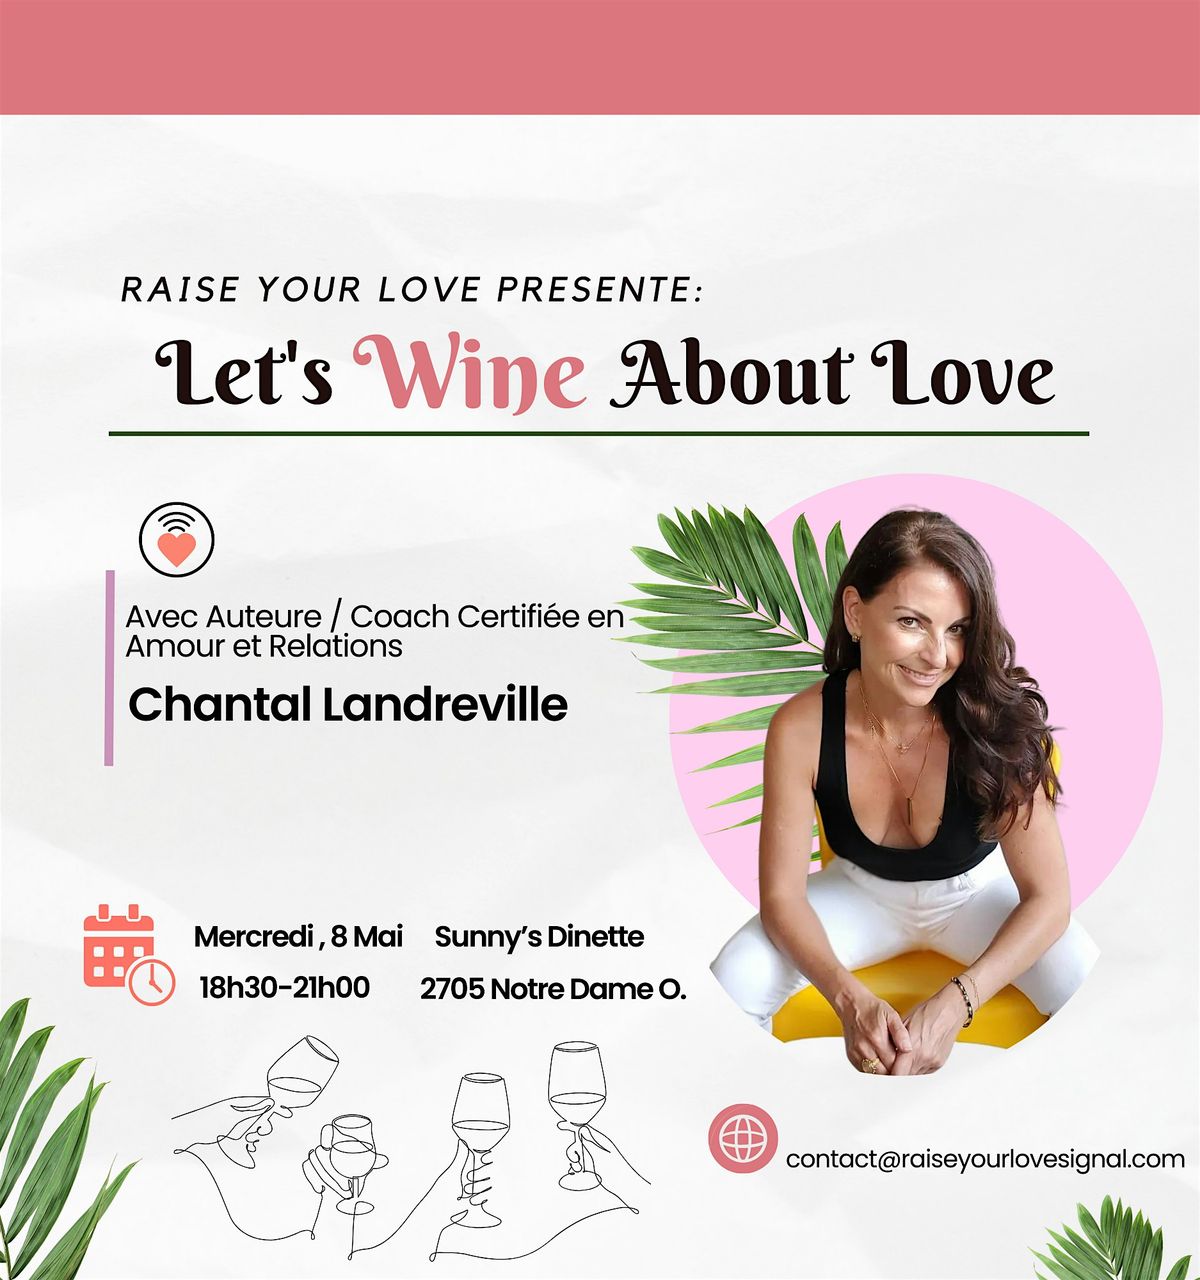 Let's Wine About Love!